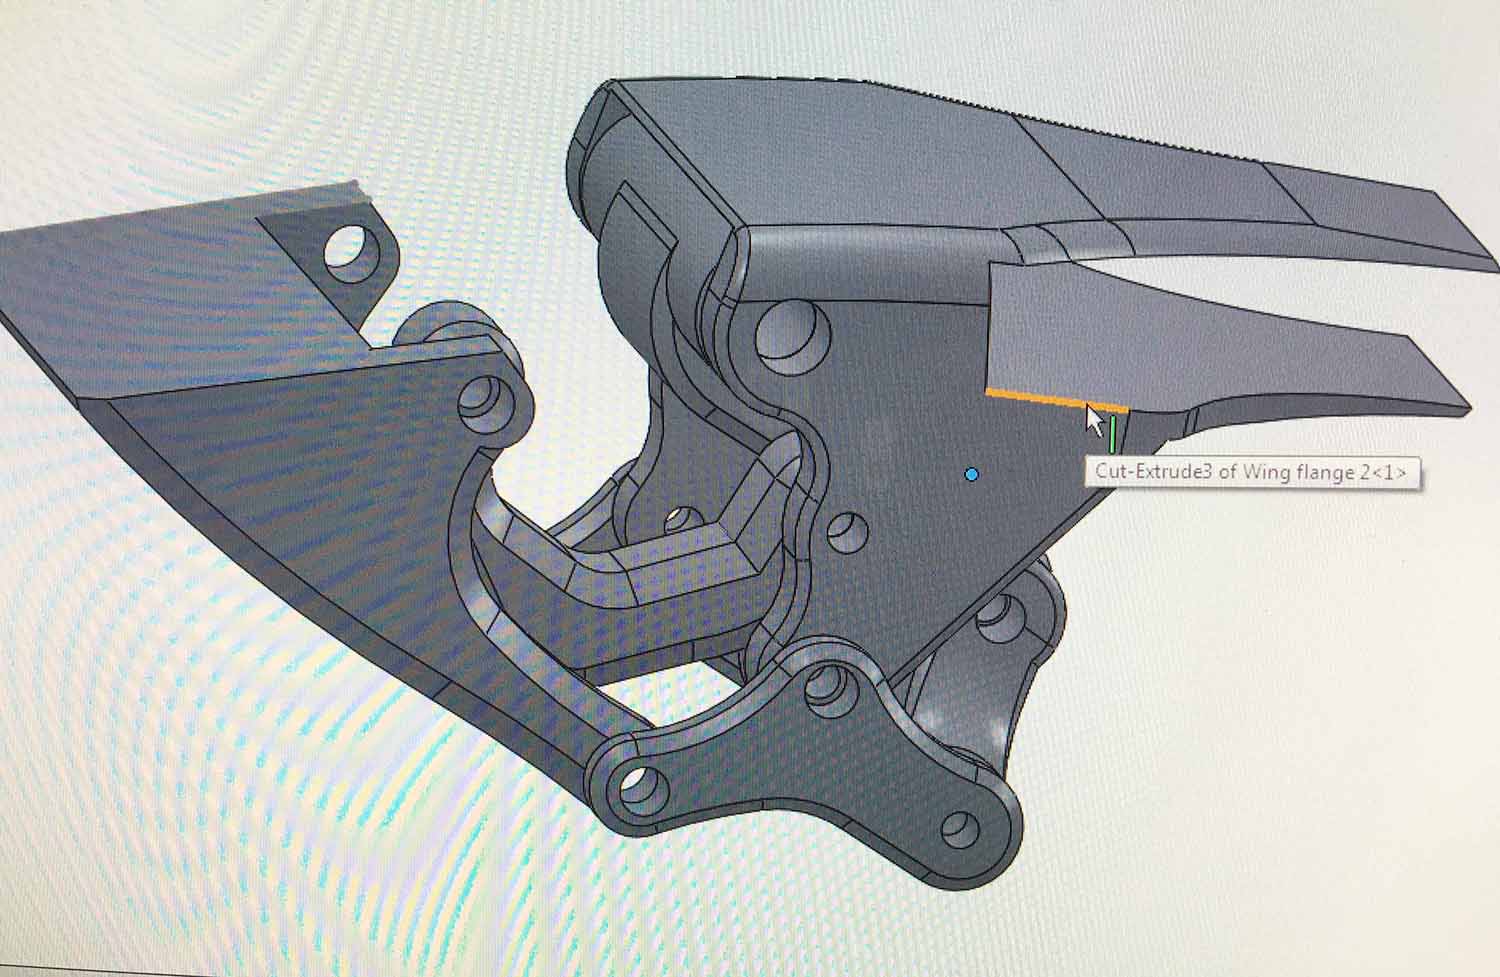 3D design of hinge that goes inside of fixed wing drone.